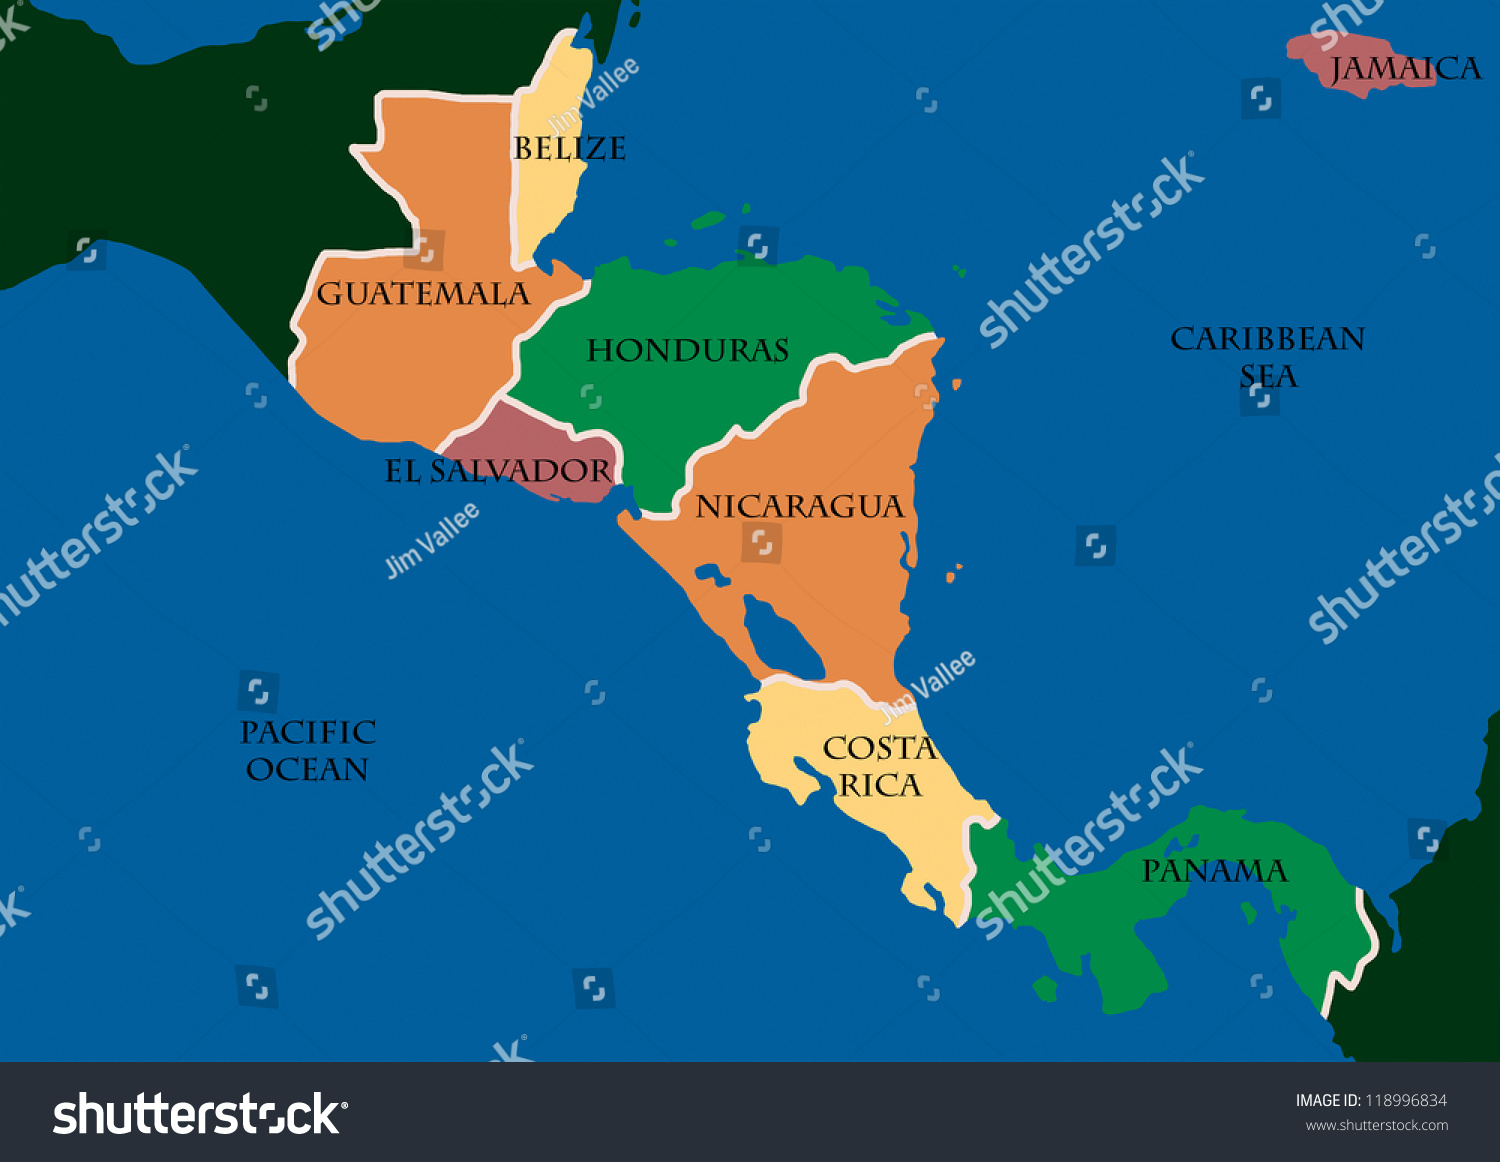 Where is Belize on a map of Central America?